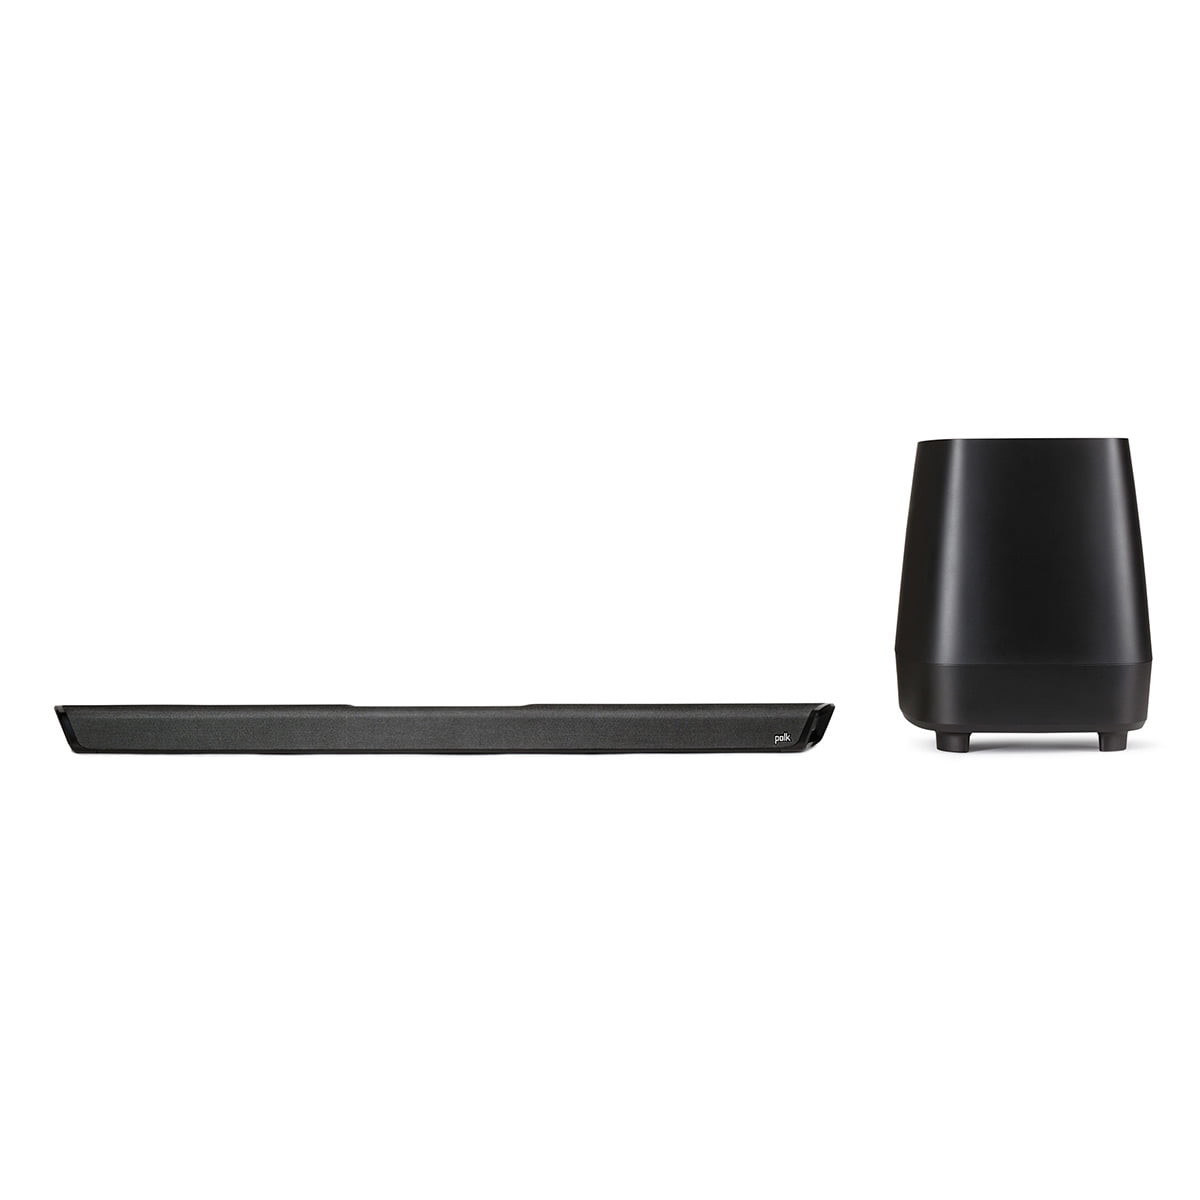 Polk Audio MagniFi 2 High-Performance Home Theater Sound Bar System with Chromecast Built-in